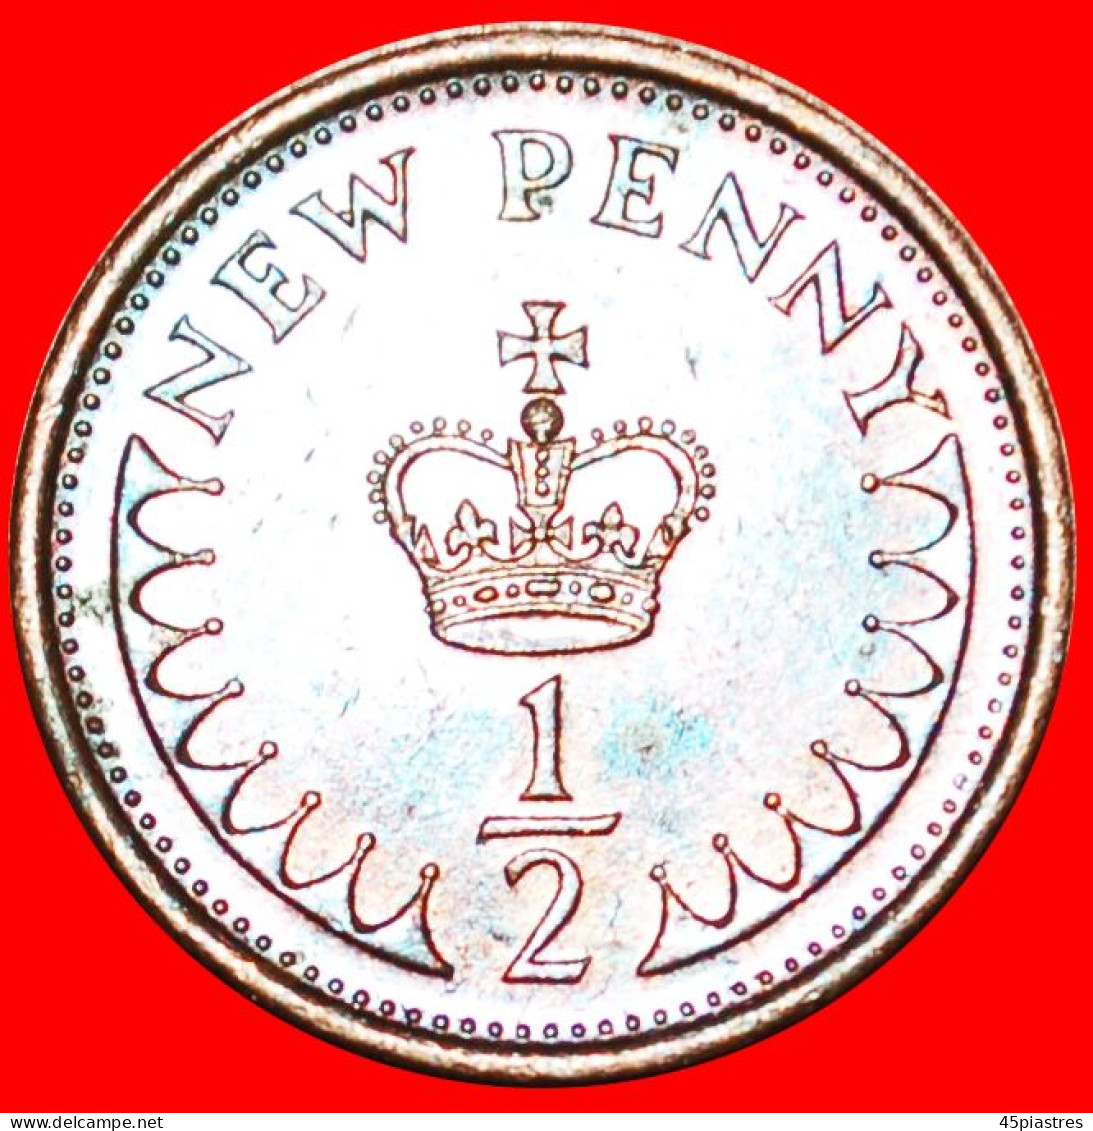 &#9733;CROWN: UNITED KINGDOM&#9733;1/2 NEW PENNY 1981! LOW START &#9733; NO RESERVE! House Of Tudor(1485 - - 1/2 Penny & 1/2 New Penny